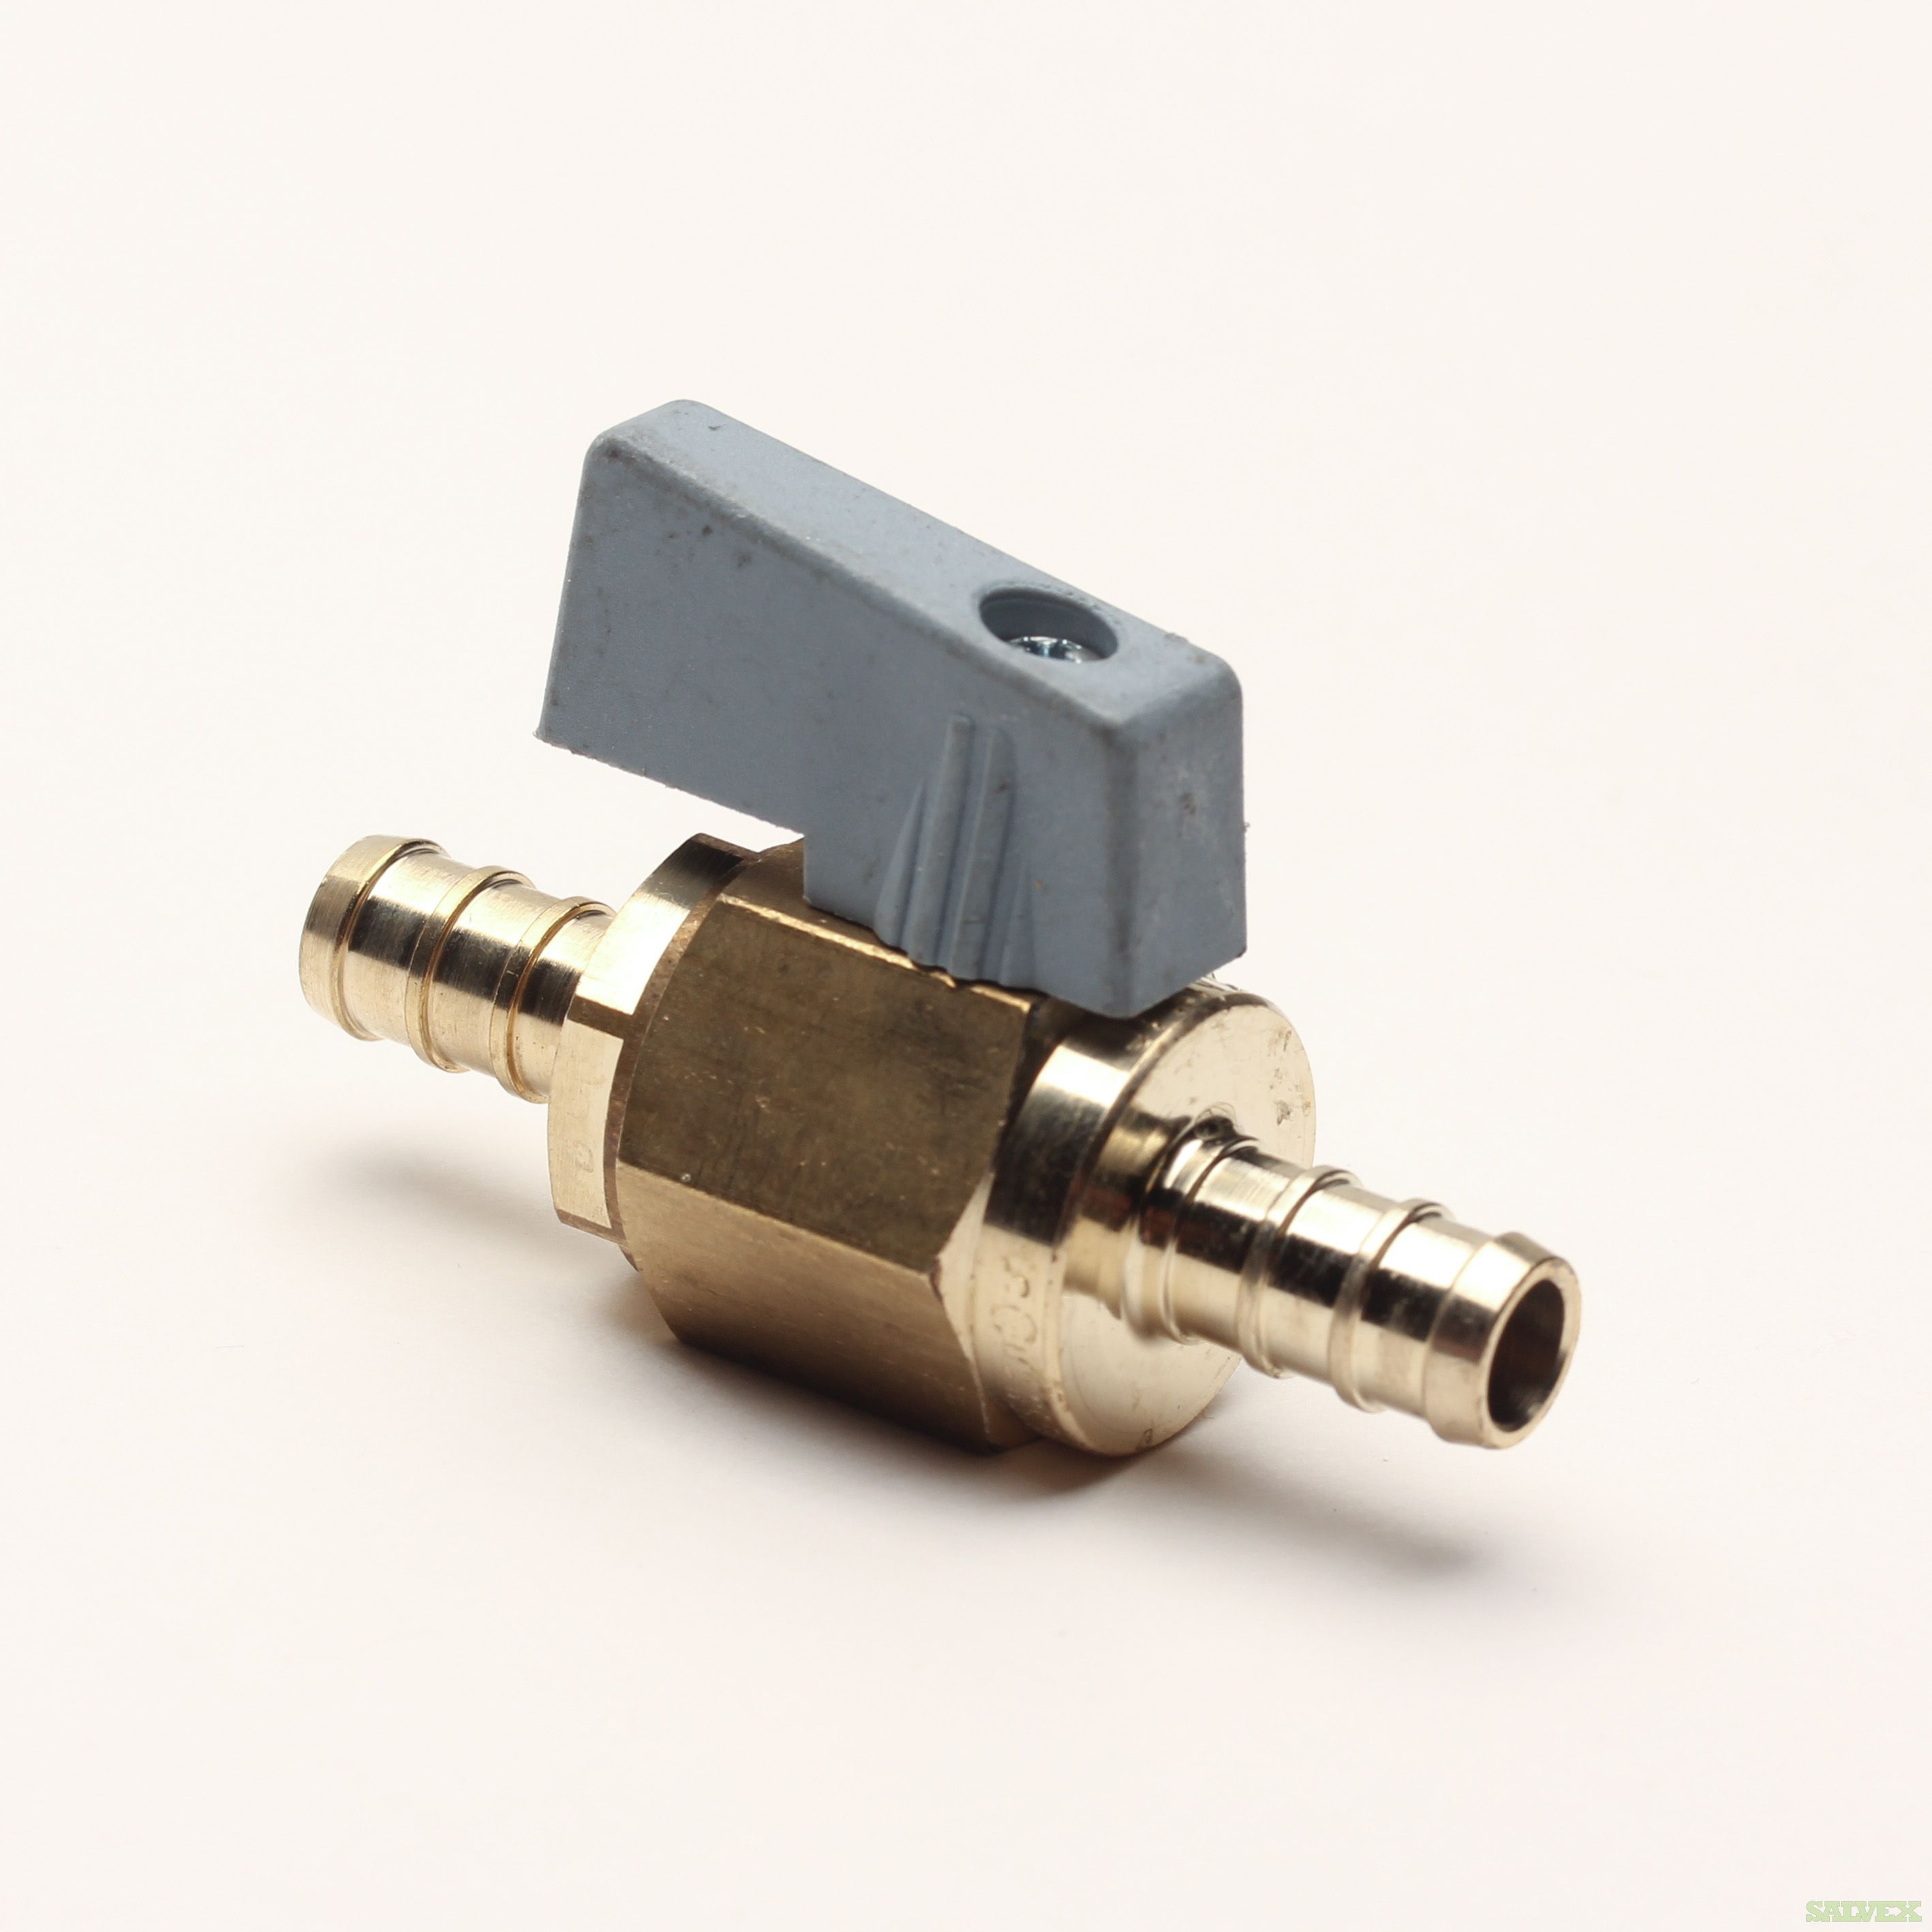 1/2; 3/4; 3/8 Brass Valves - For Use With PEX (Cross-Linked Polyethylene) In Domestic Potable Water Applications (74,829 Units)